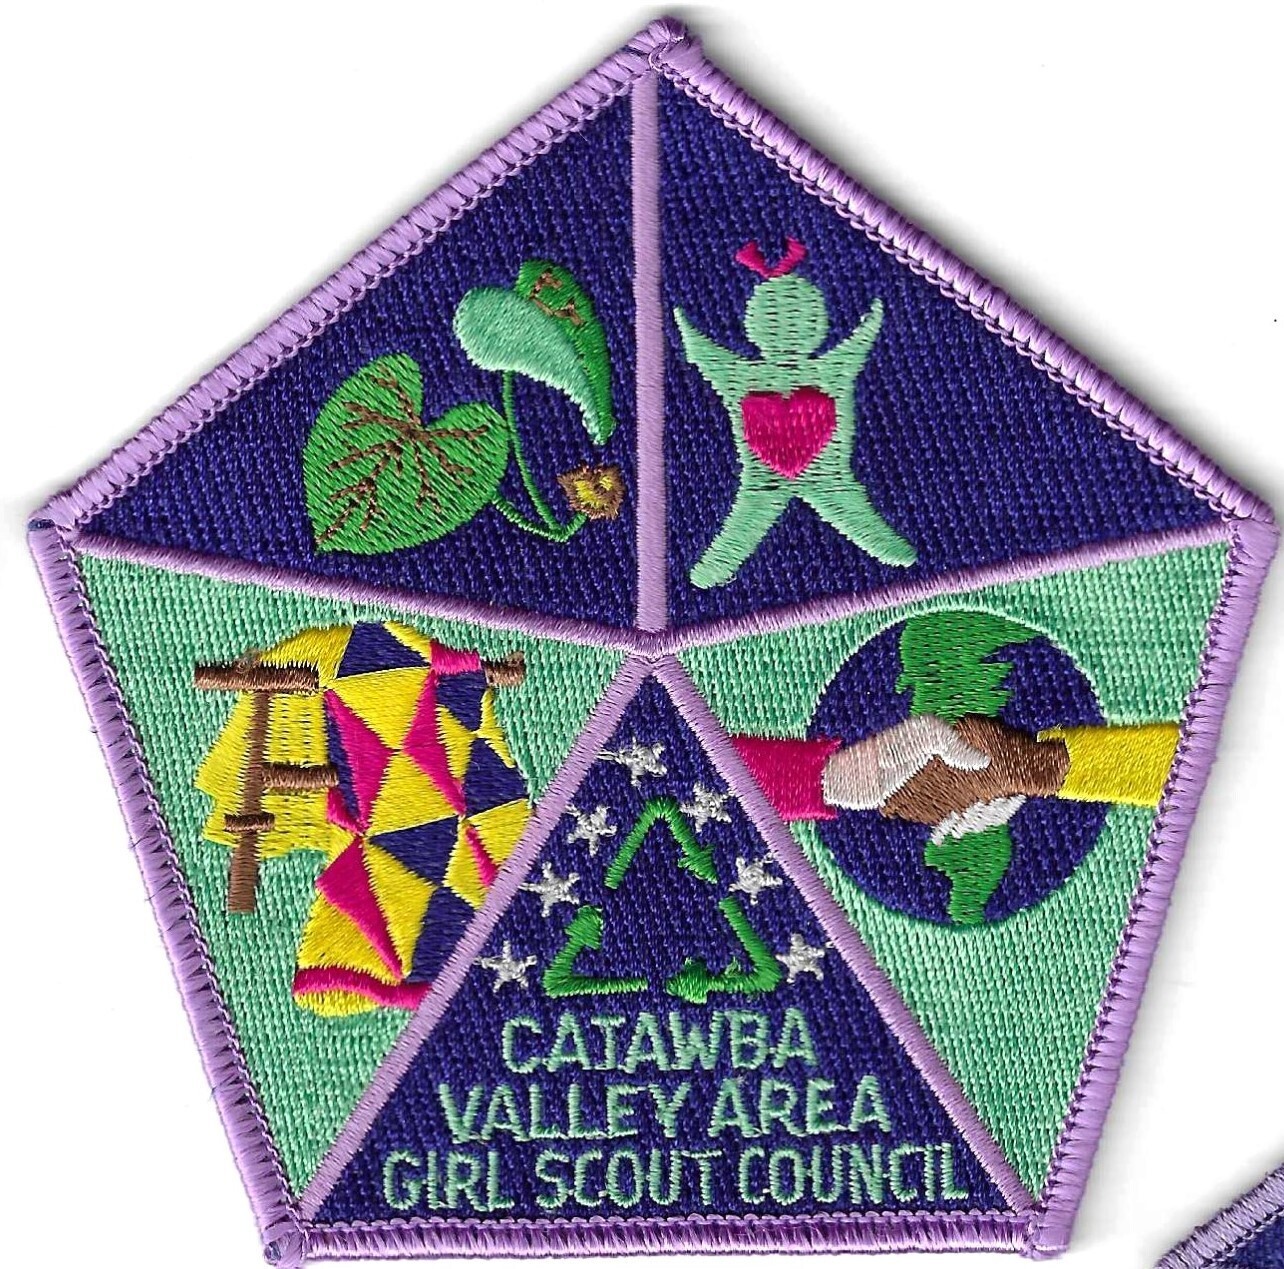 Catawba Valley Area GSC council patch (N Carolina)